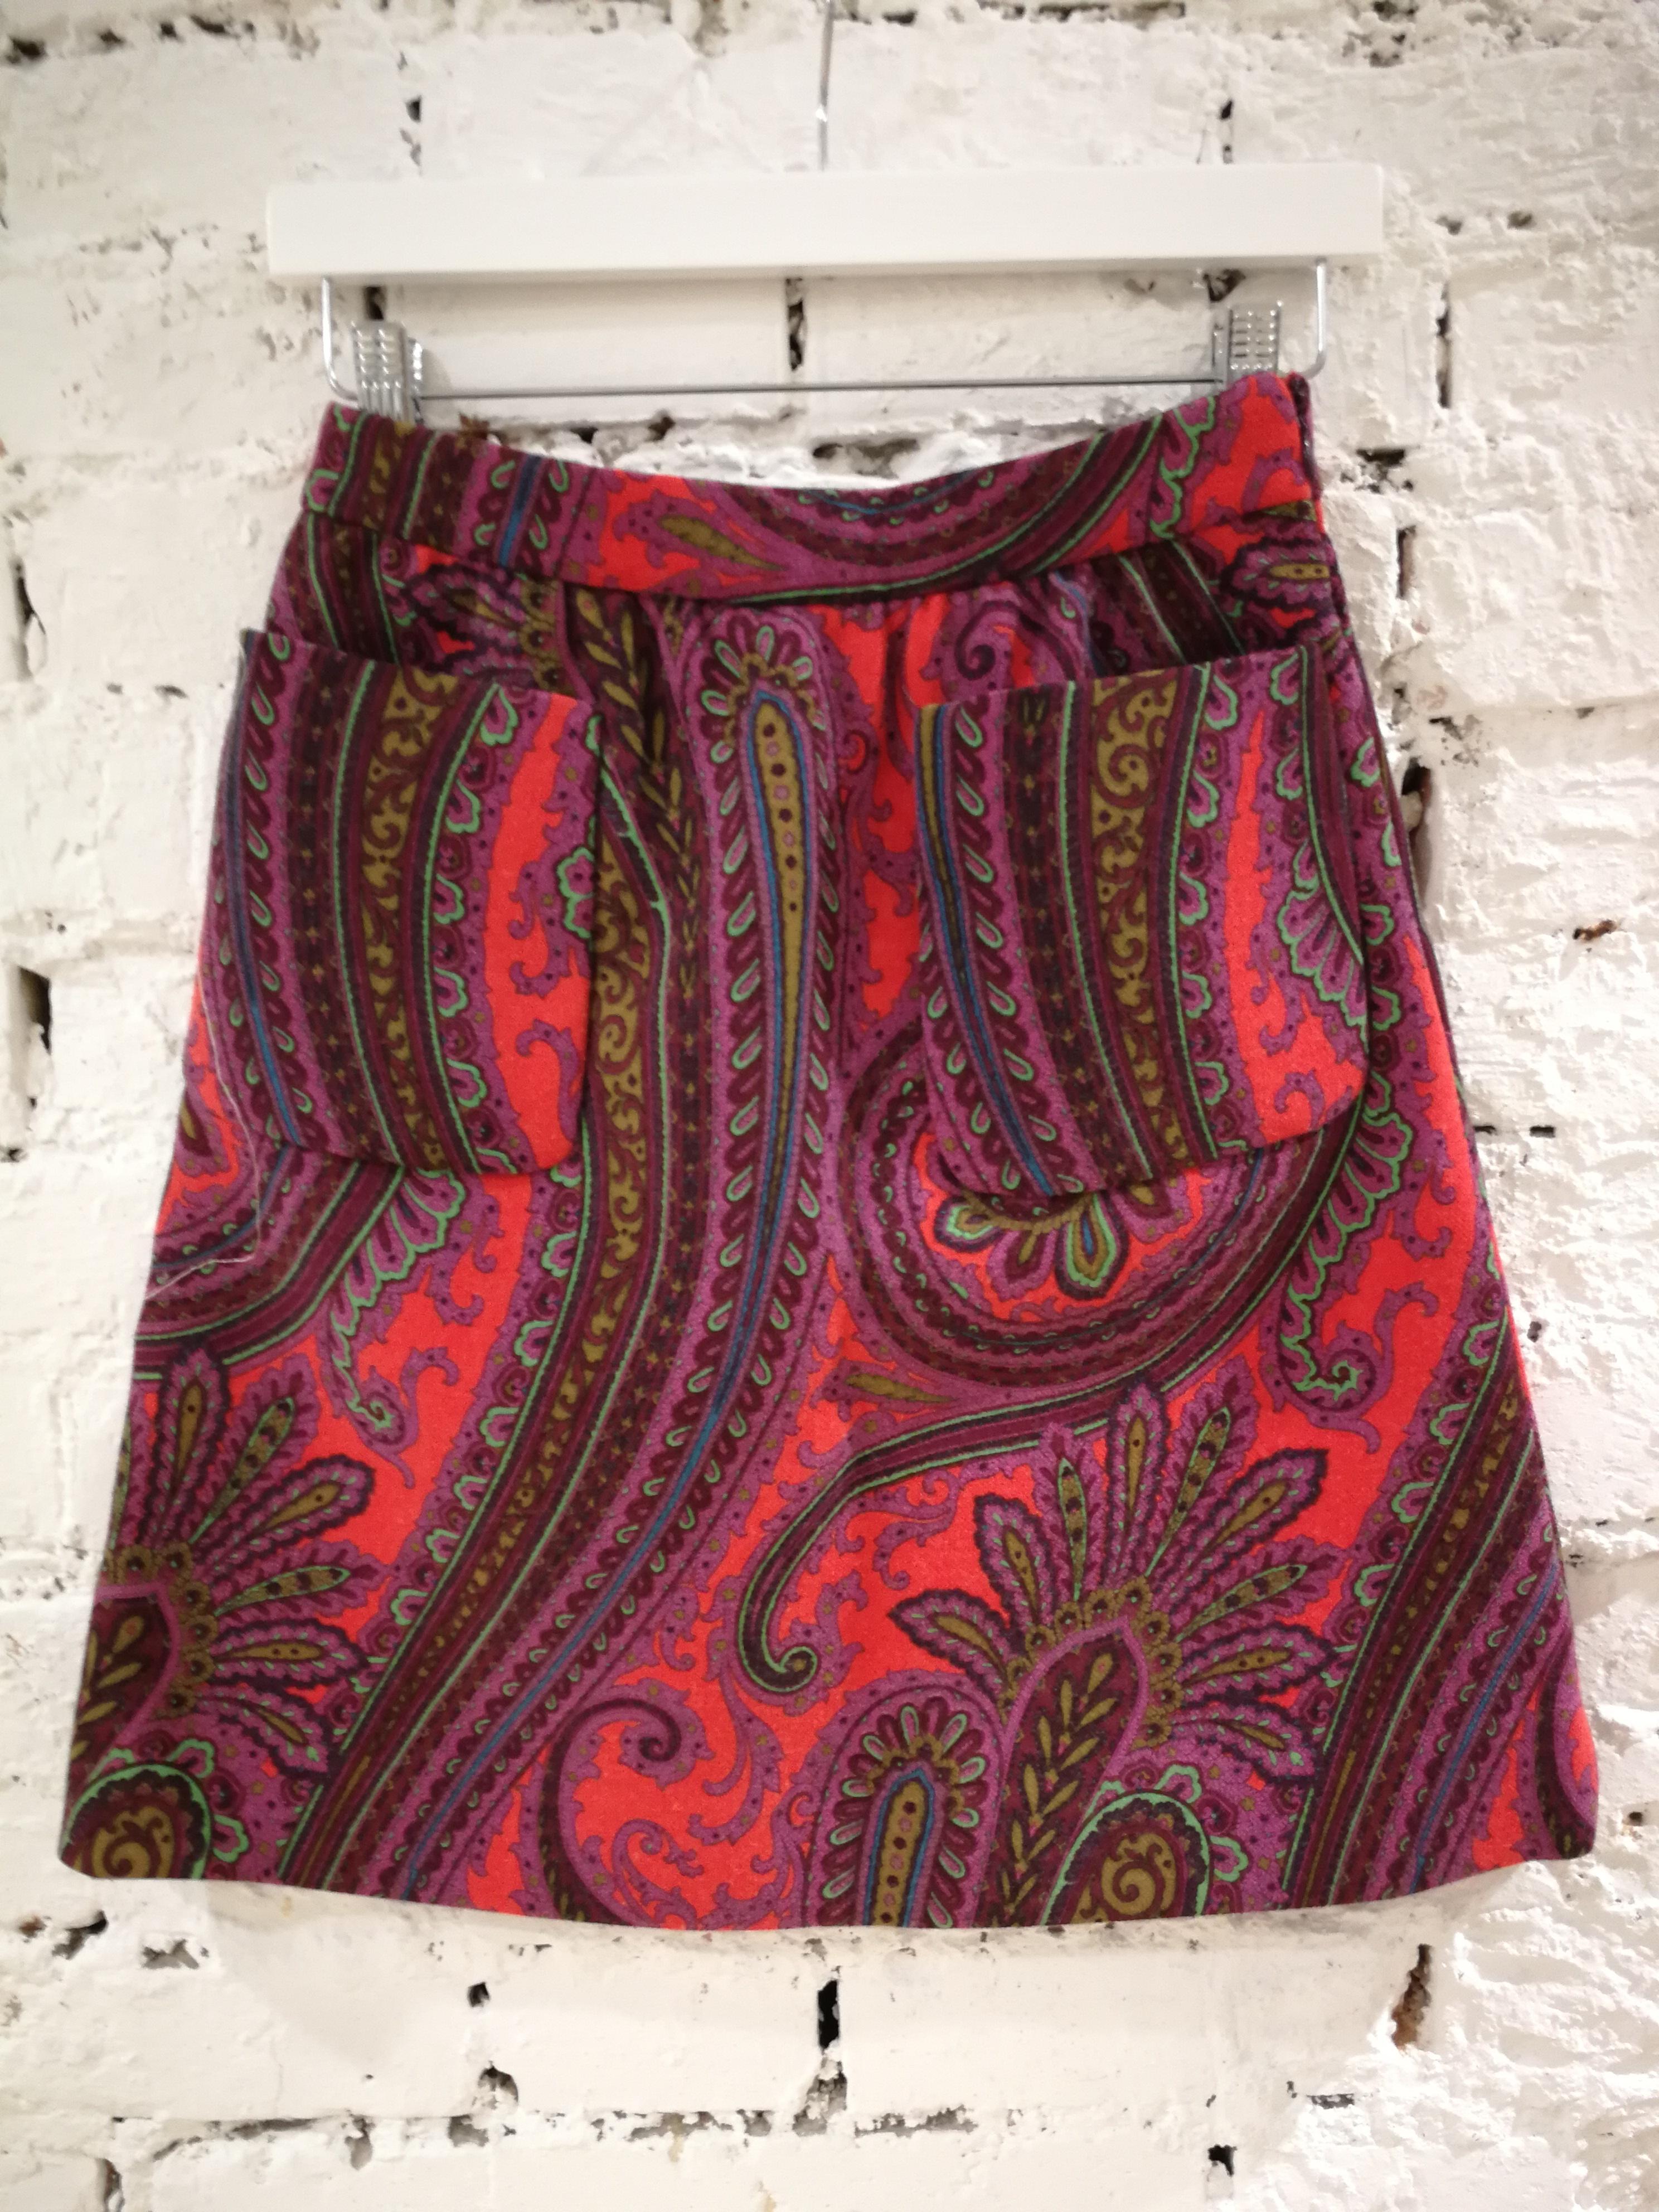 Miu Miu multicoloured Wool Skirt

Totally made in italy 

Waist 66 cm
total lenght 47 cm